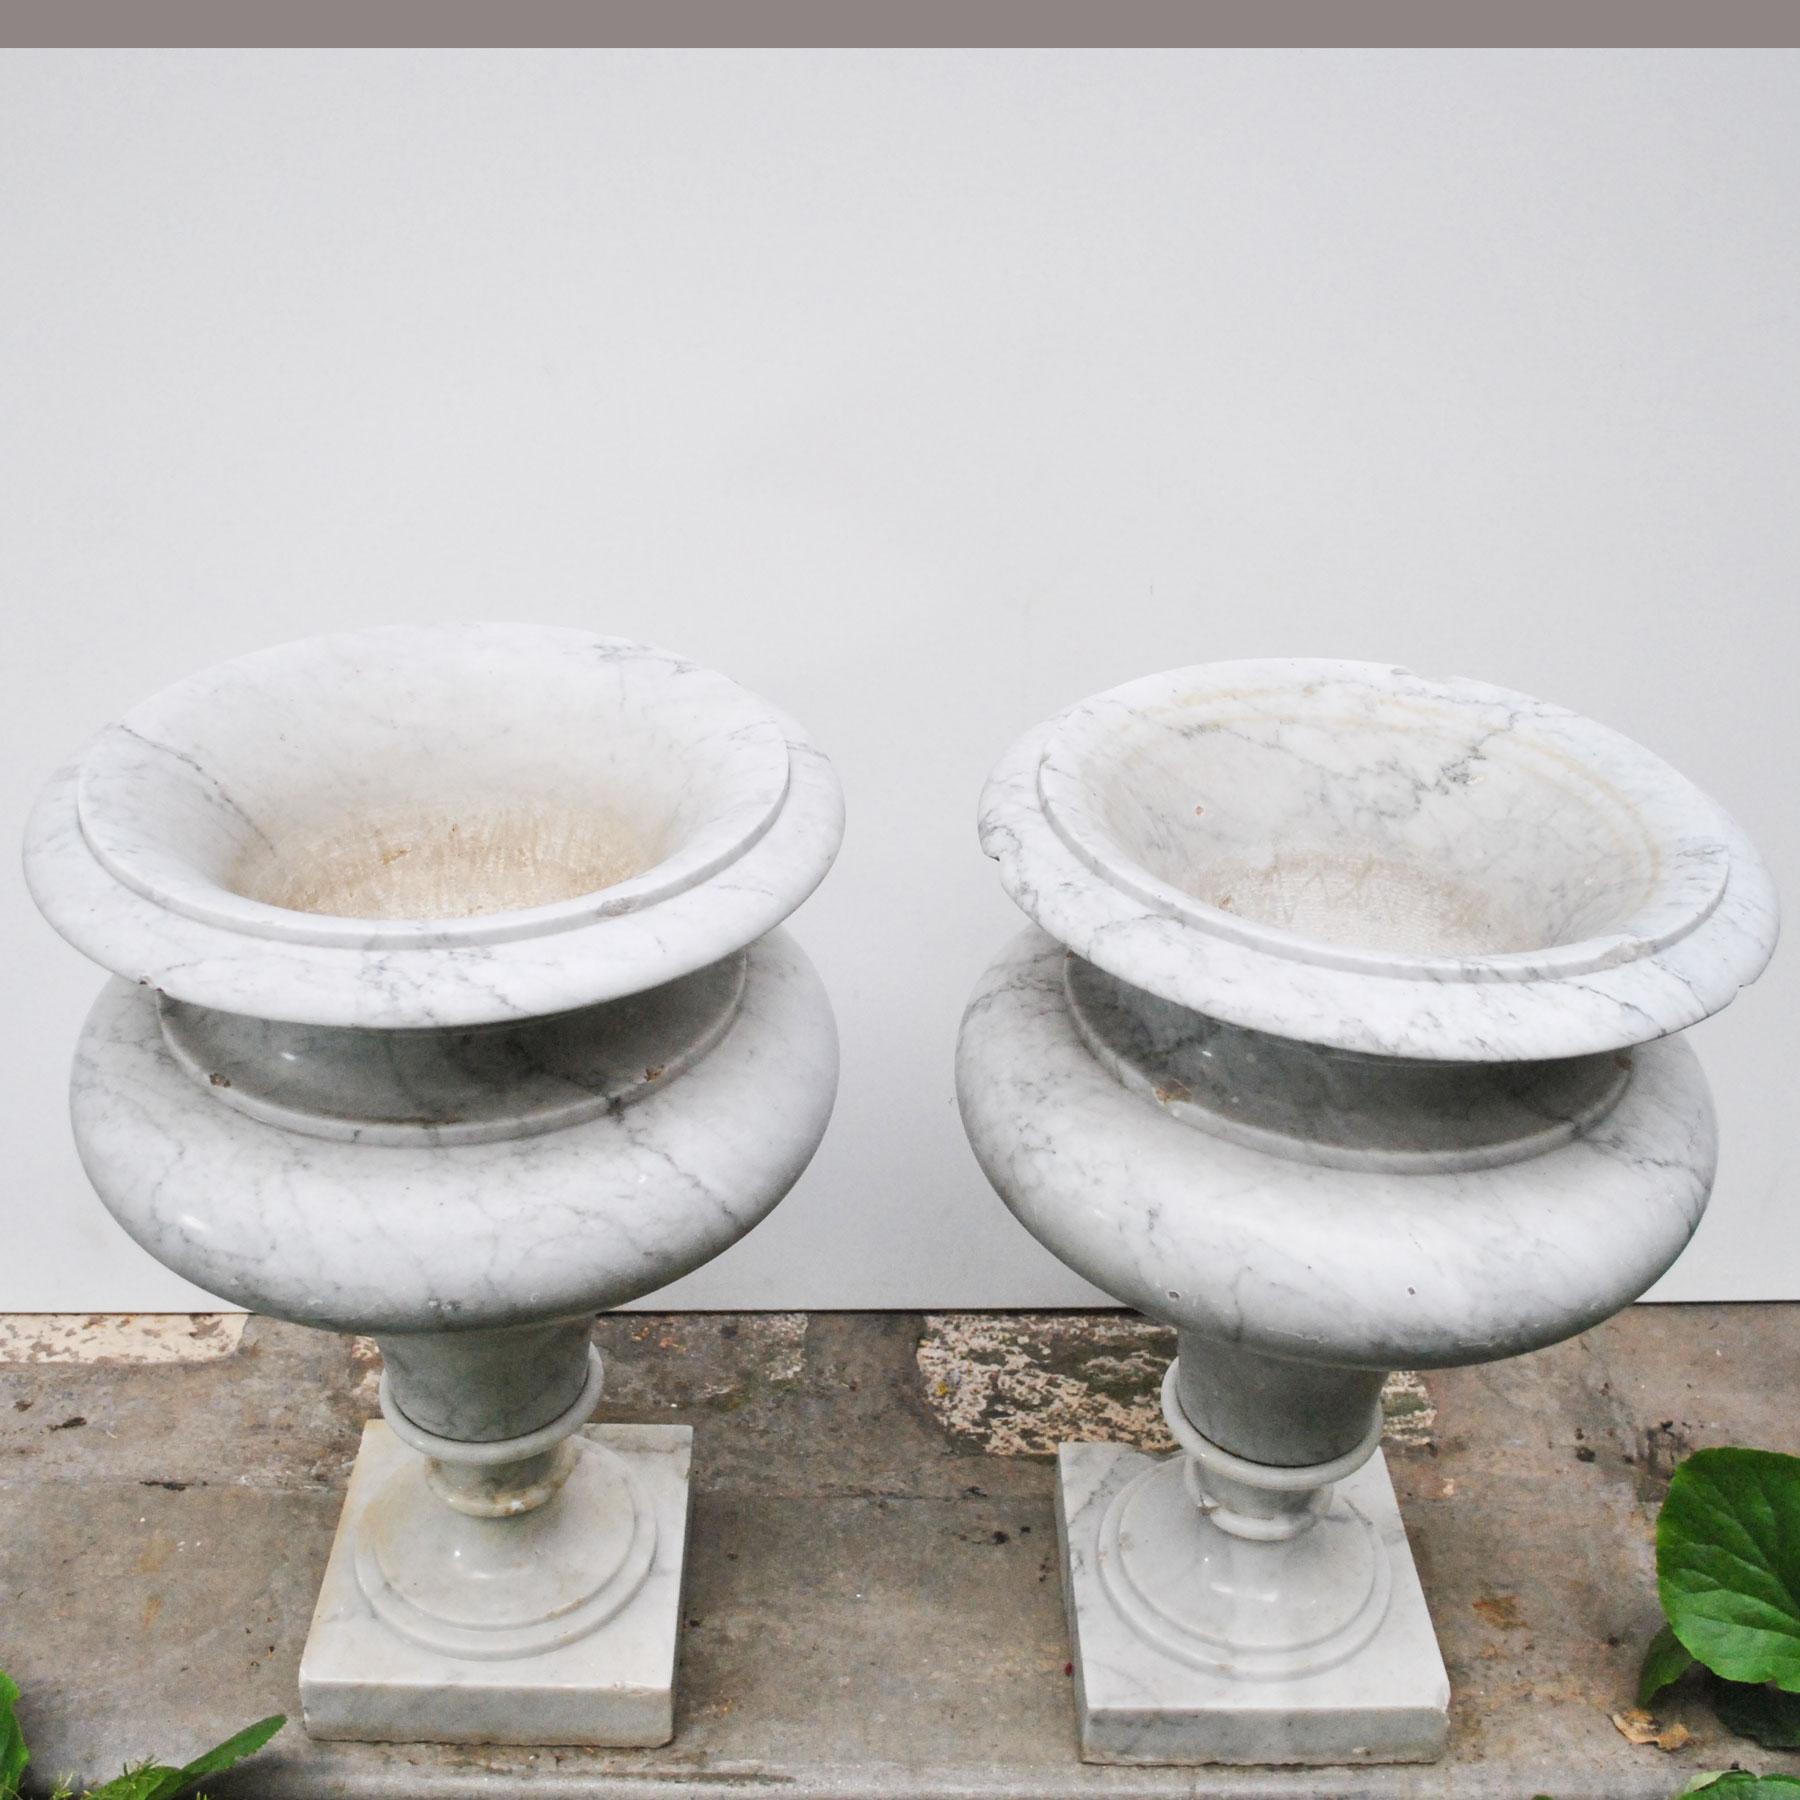 Elegant Pair of Large Carrara Marble Vases, Period Early 20th Century For Sale 2